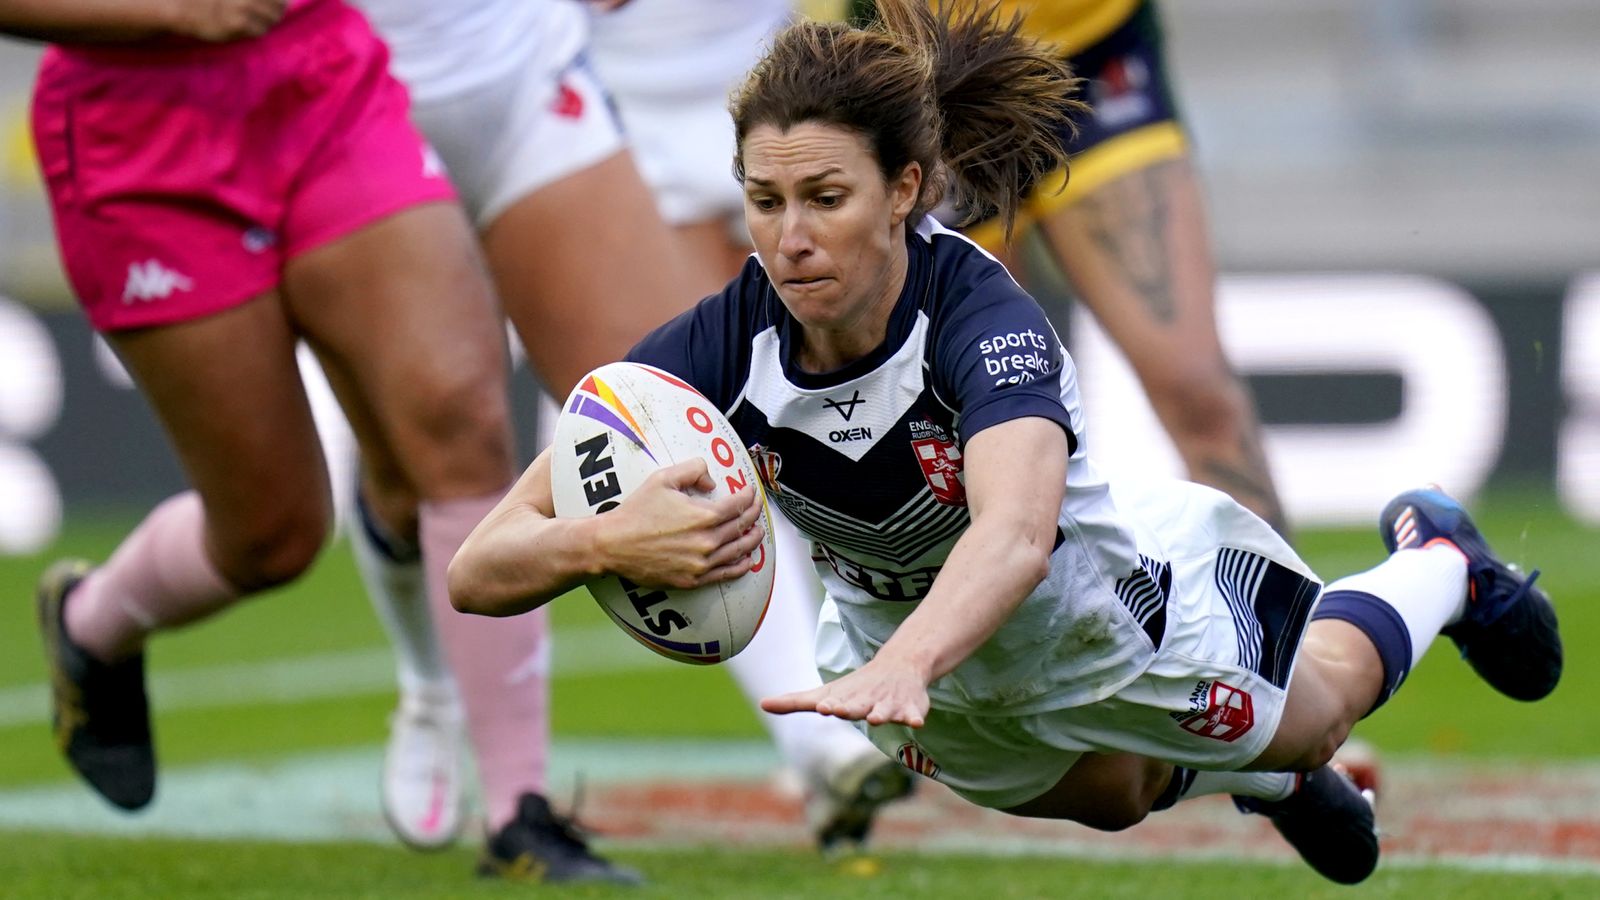 women-s-rugby-league-world-cup-courtney-winfield-hill-ready-to-build-something-special-with-england-or-we-can-grow-momentum